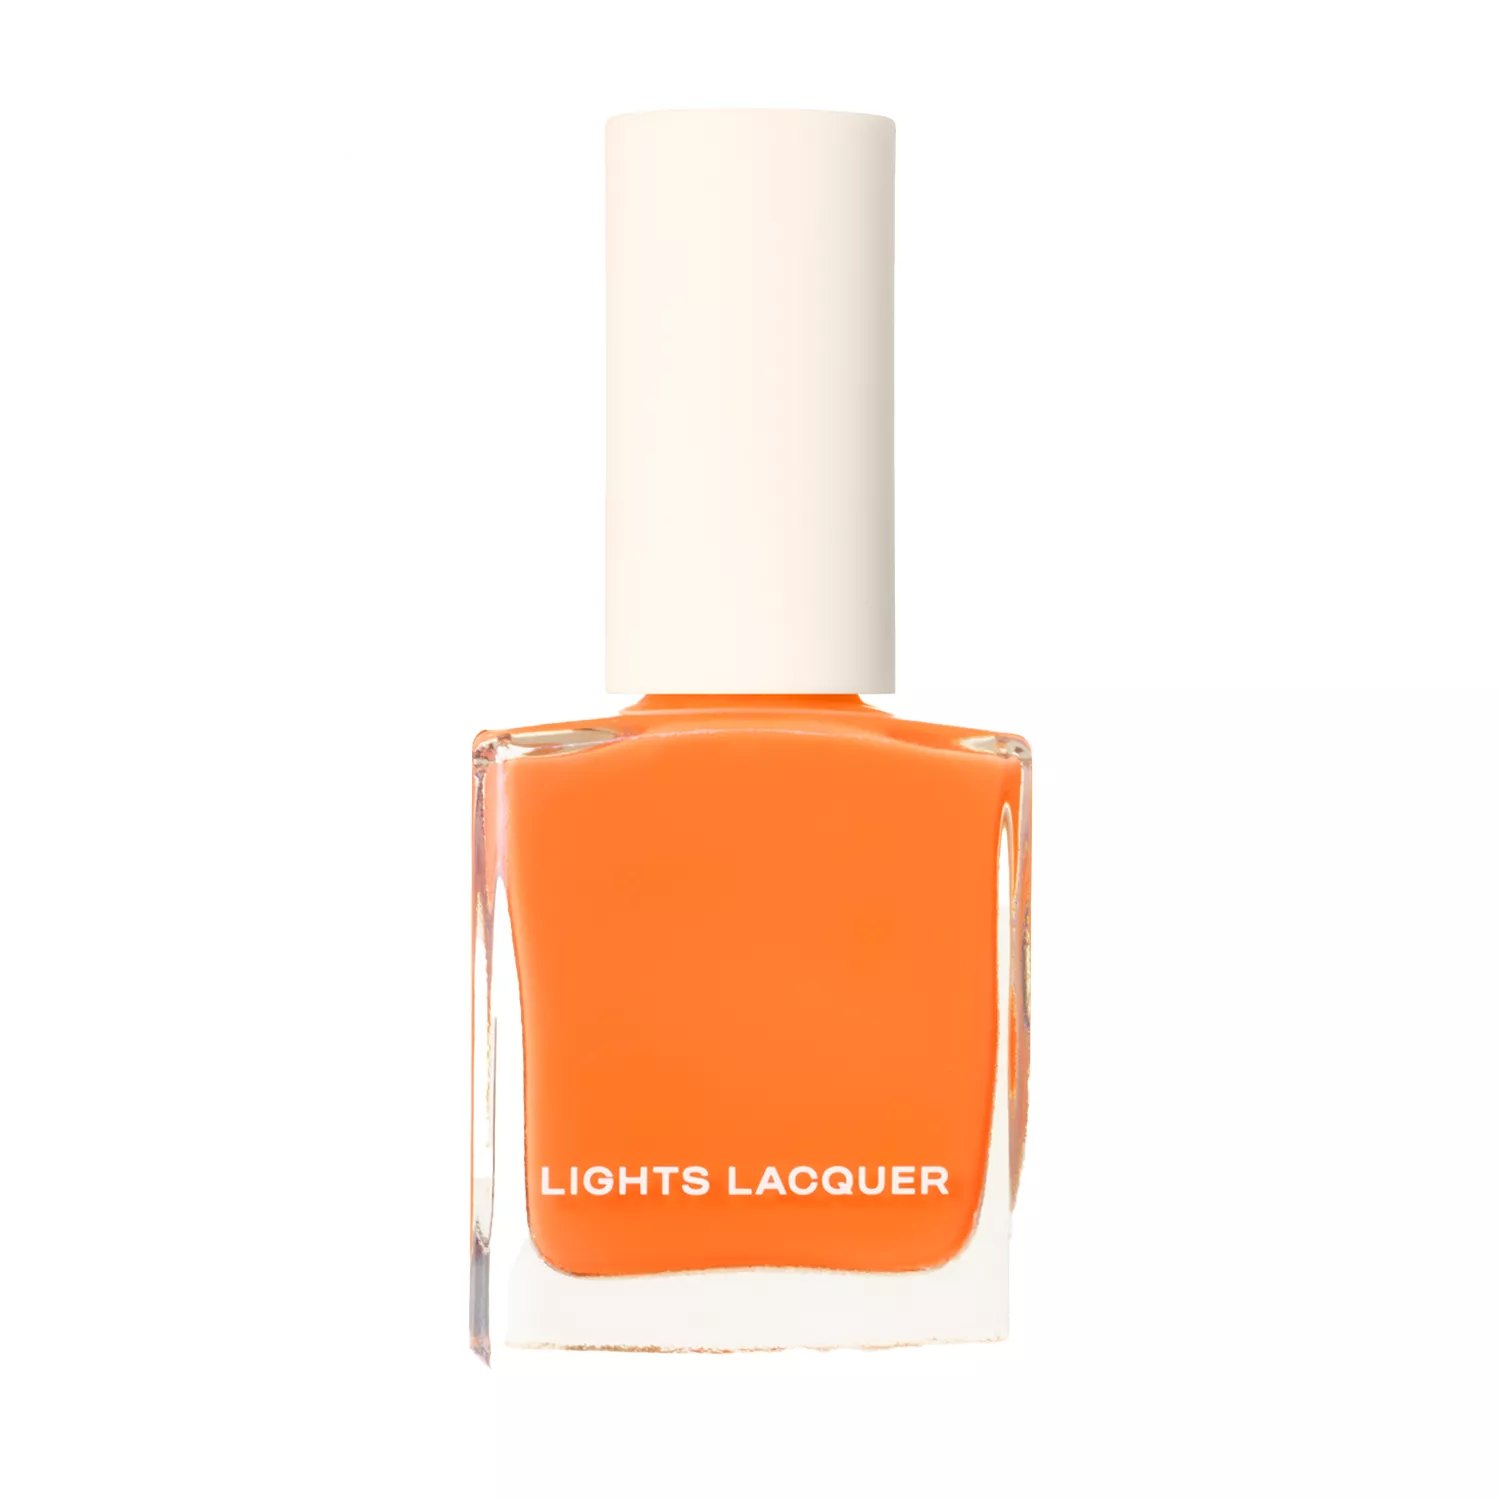 Lights Lacquer Hide the Rum! Nail Polish